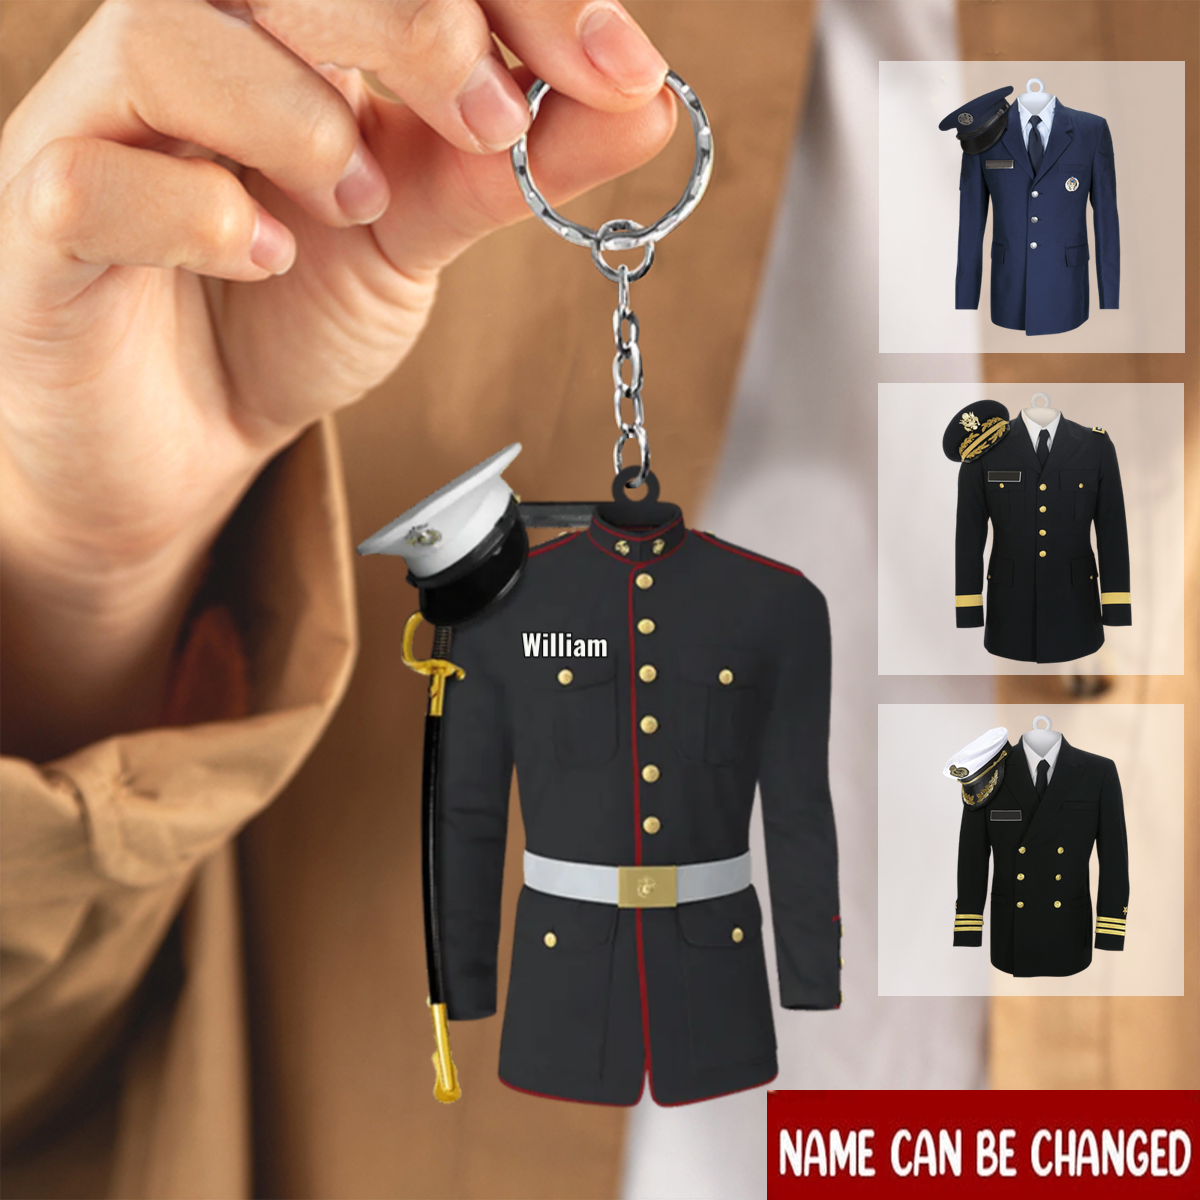 Personalized Acrylic KeychainMarine Army Airforce Air Force Navy Uniform